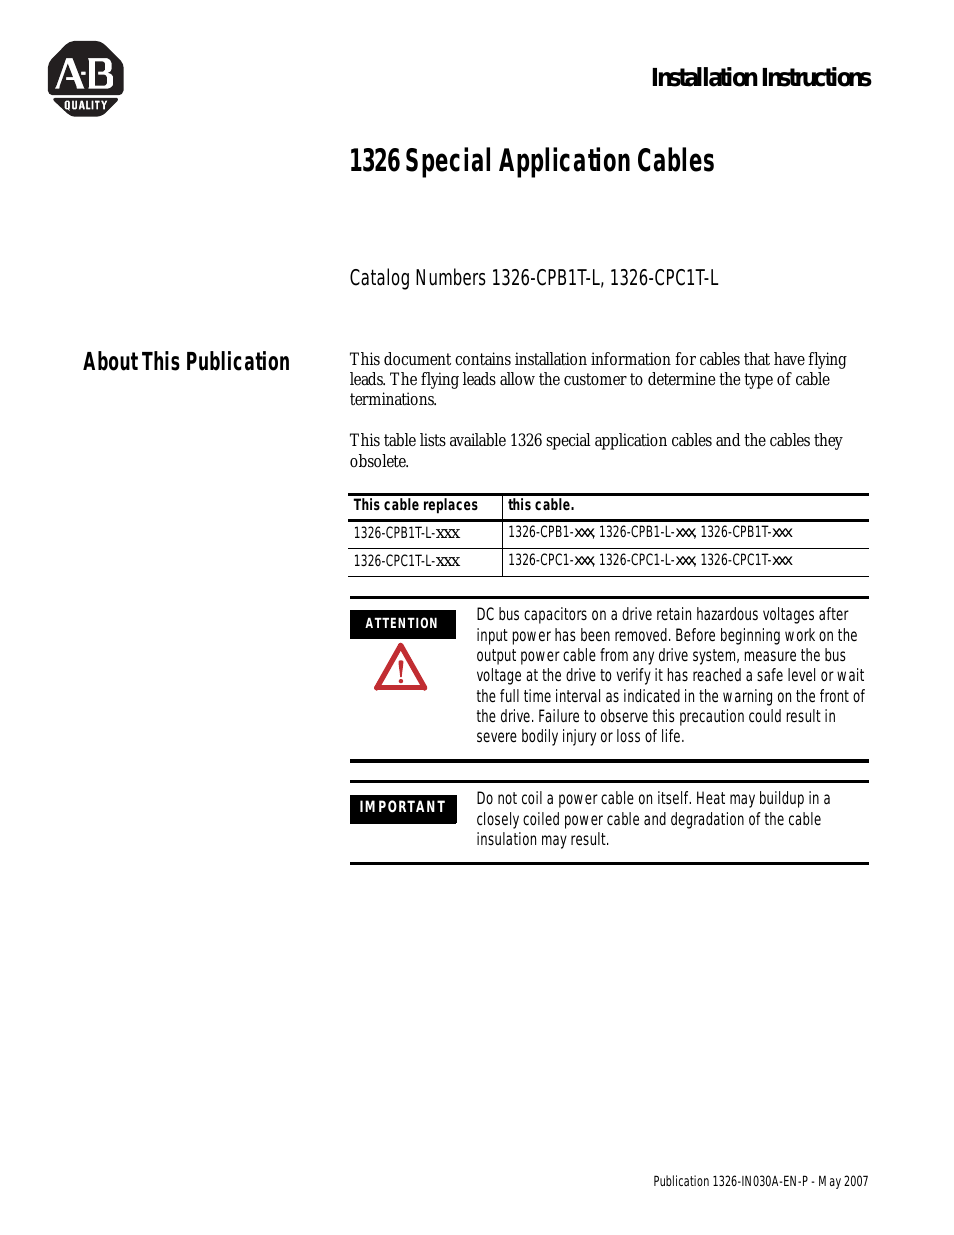 1326-CPB1T-L Special Application Cables